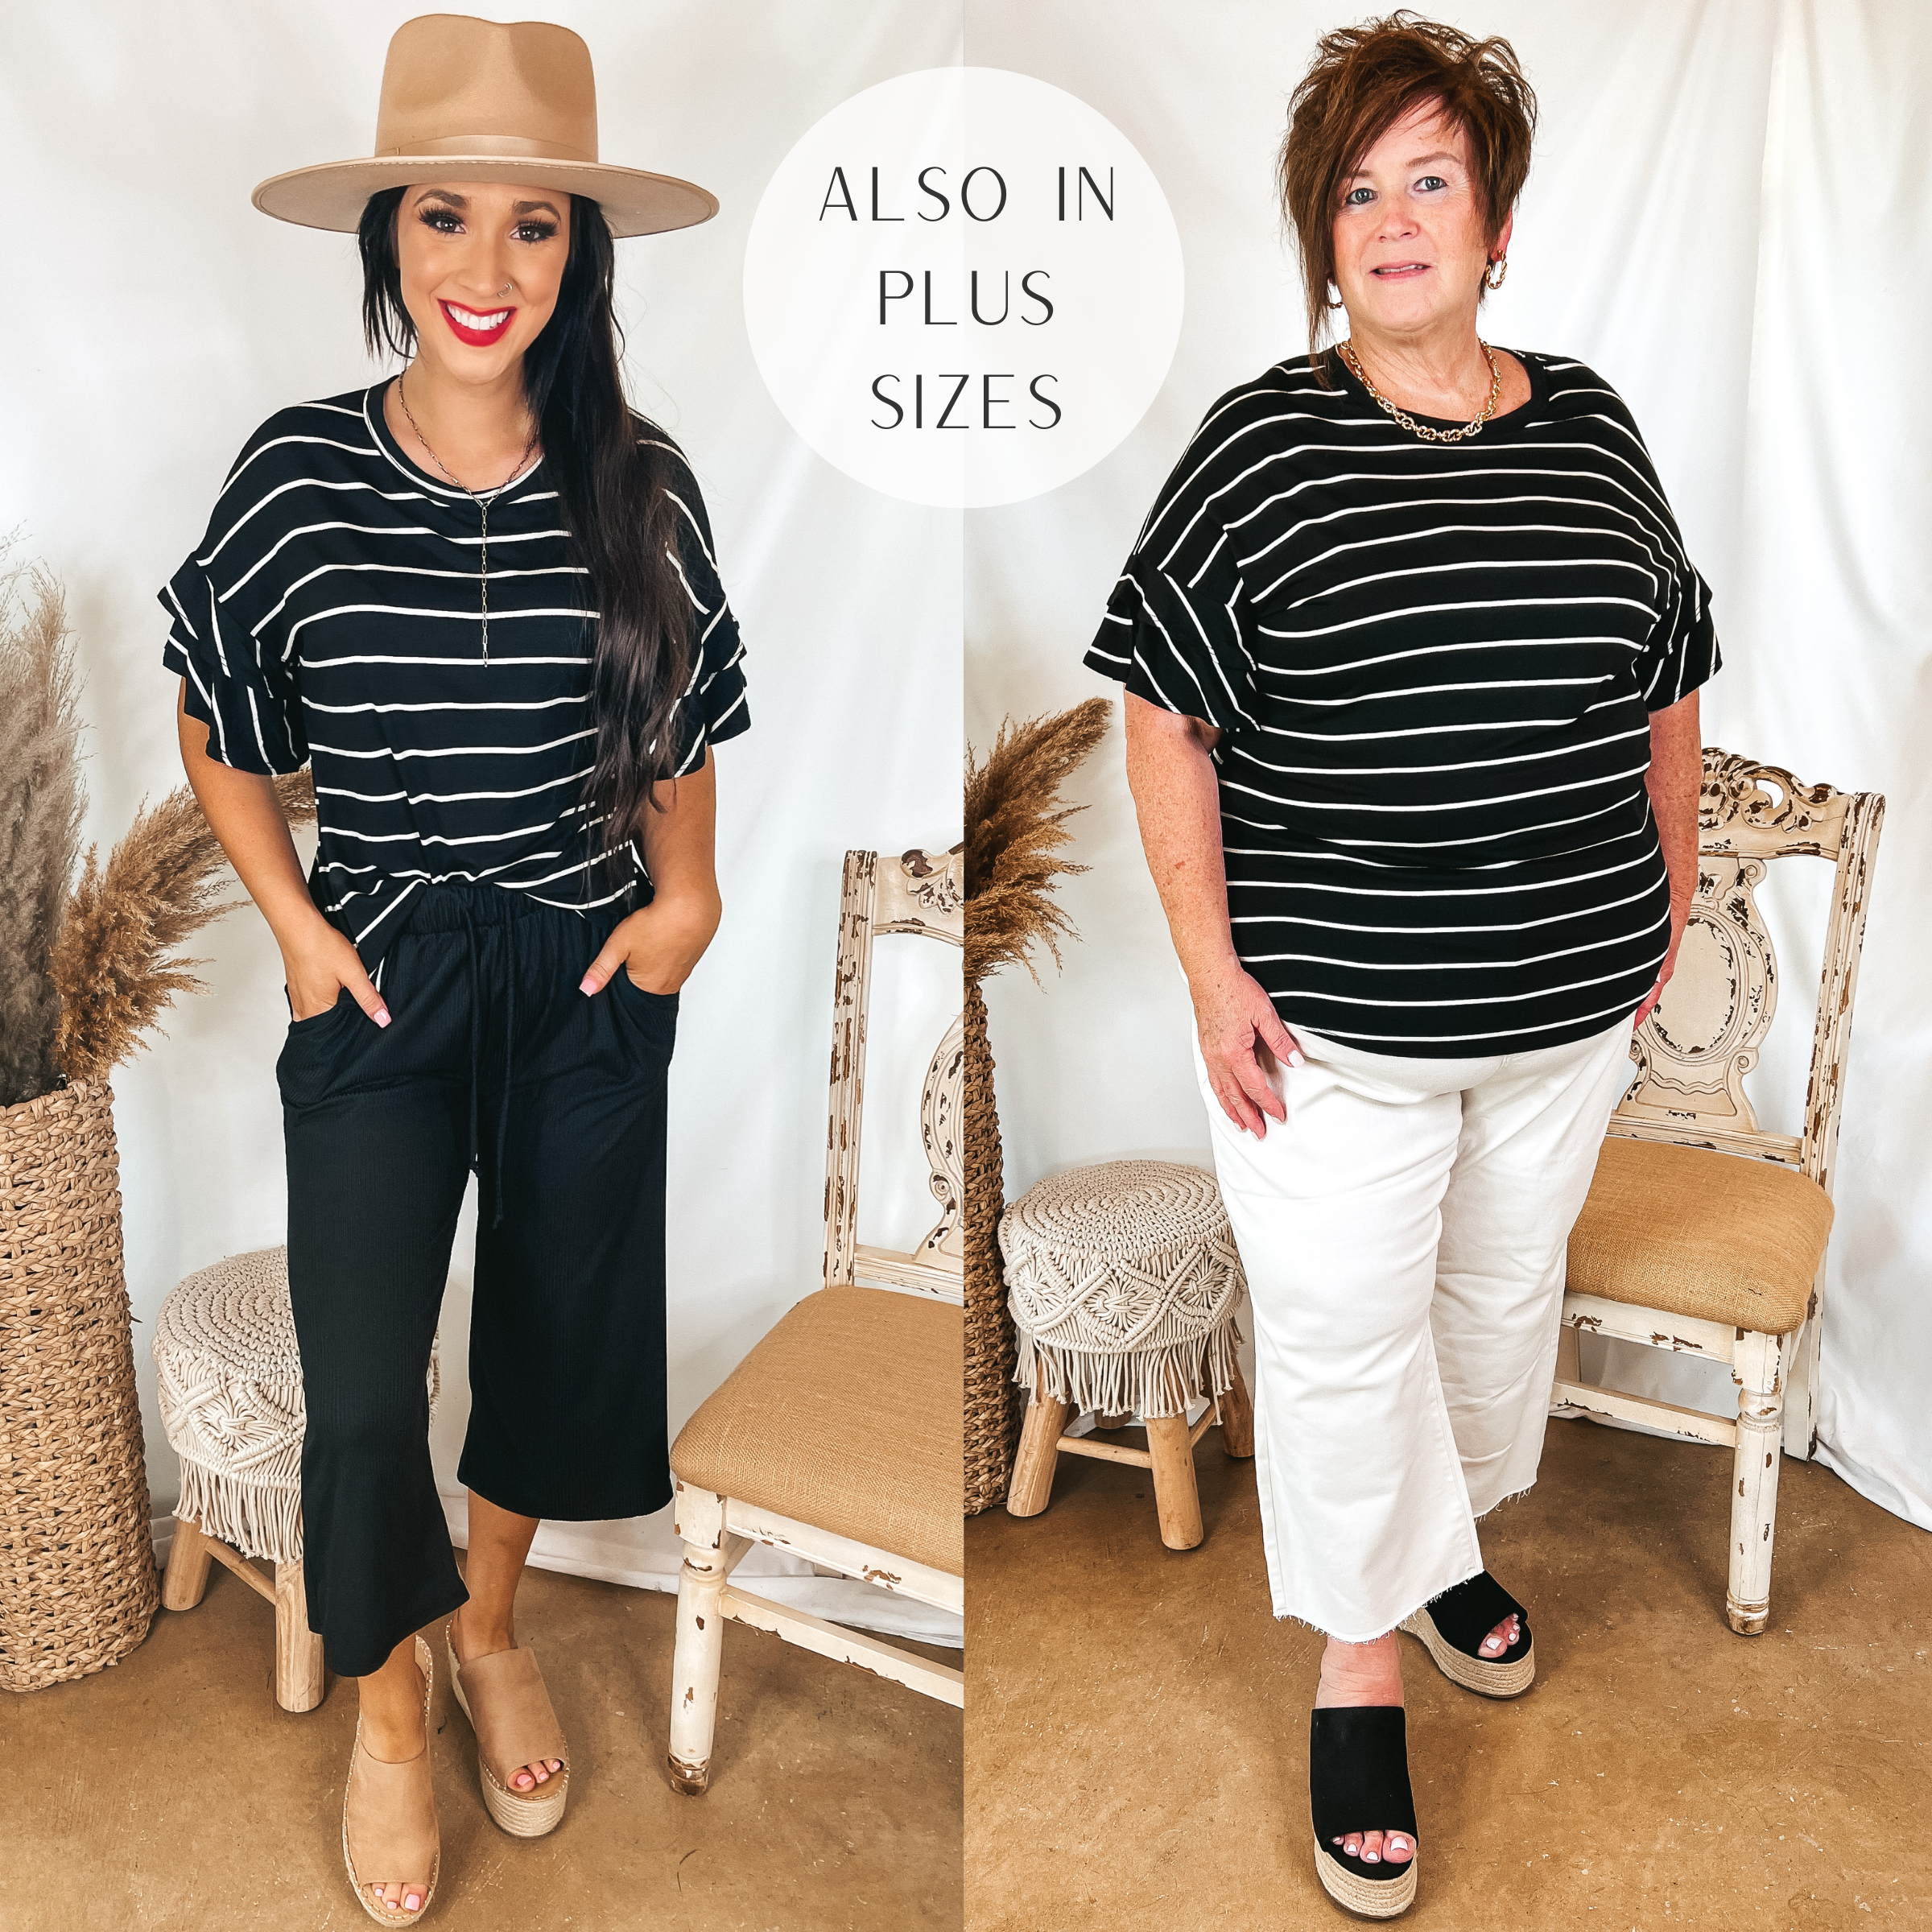 Models are wearing a black and white striped top that has ruffle short sleeves. Size small model has it paired with black cropped pants, tan wedges, and a tan hat. Plus size model has it paired with black wedges, white cropped jeans, and gold jewelry.